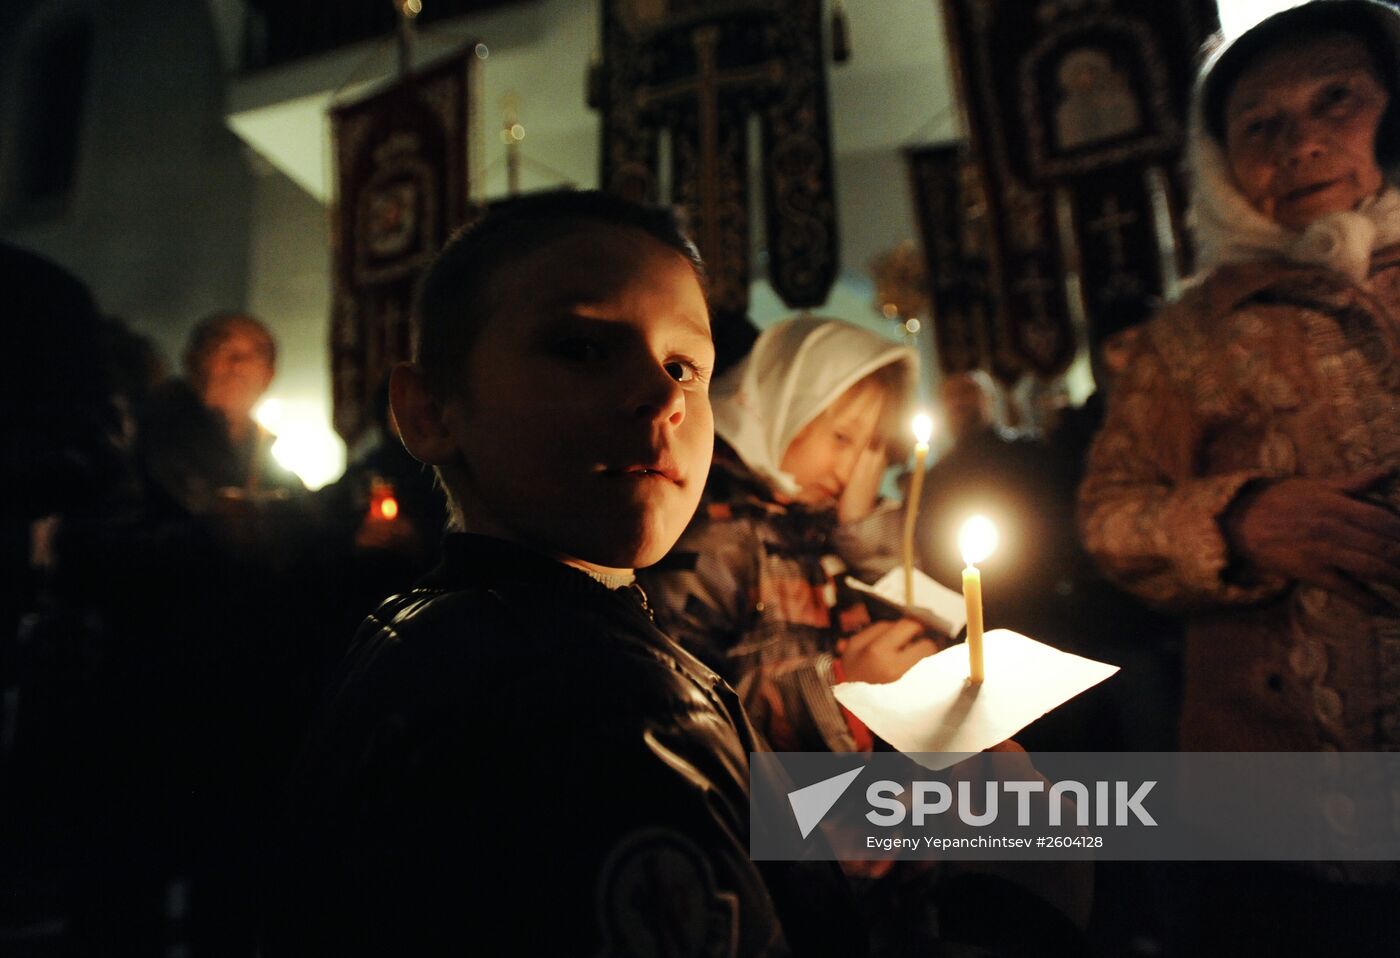 Orthodox Christians celebrate Easter in Russia